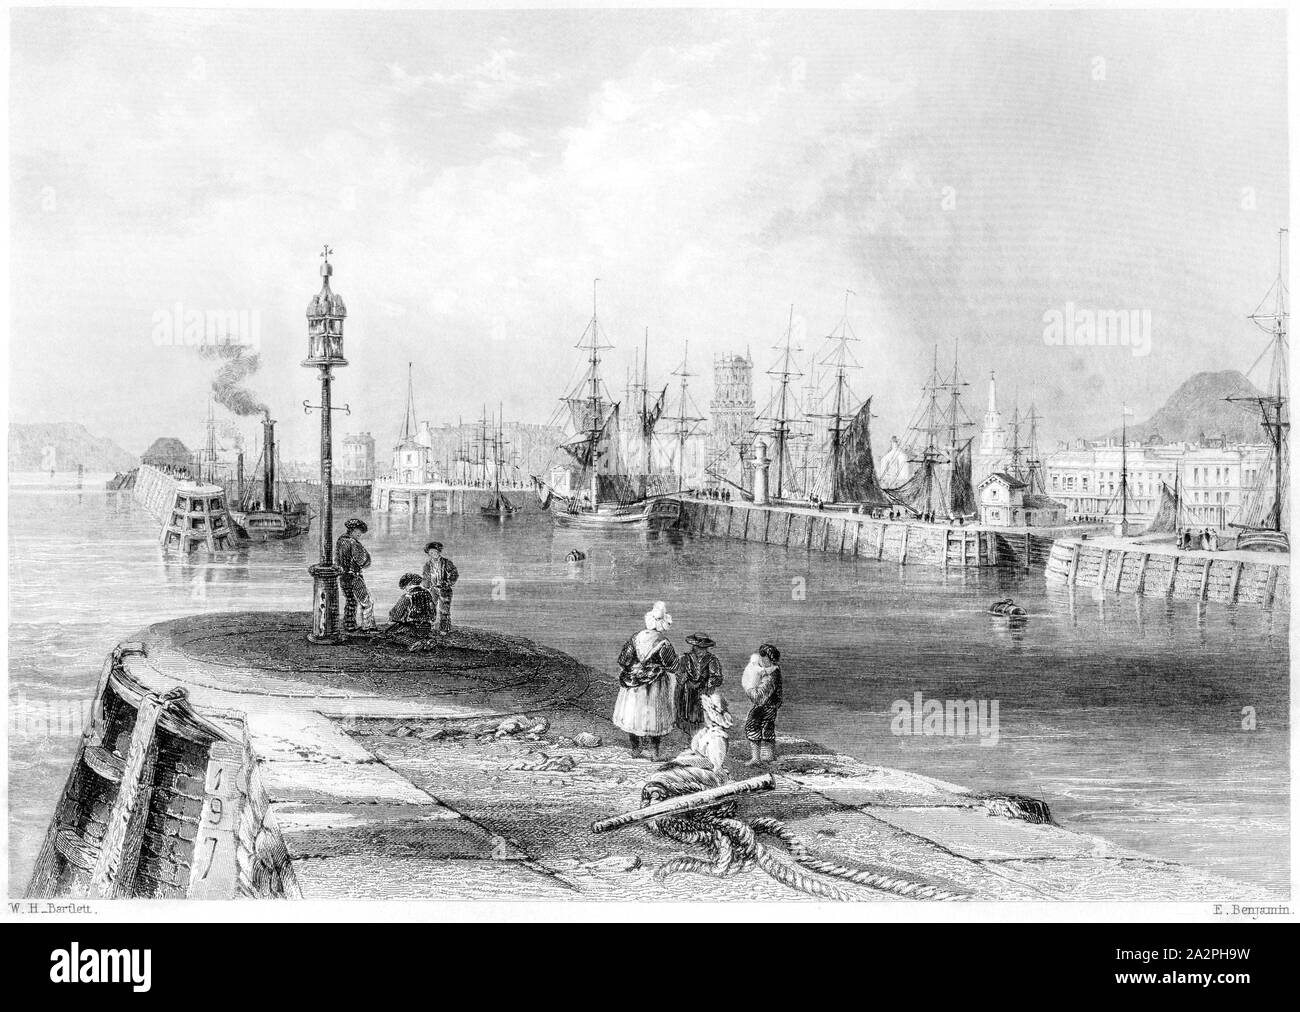 An engraving of the Entrance to the Port of Dundee scanned at high resolution from a book printed in 1842.  Believed copyright free. Stock Photo